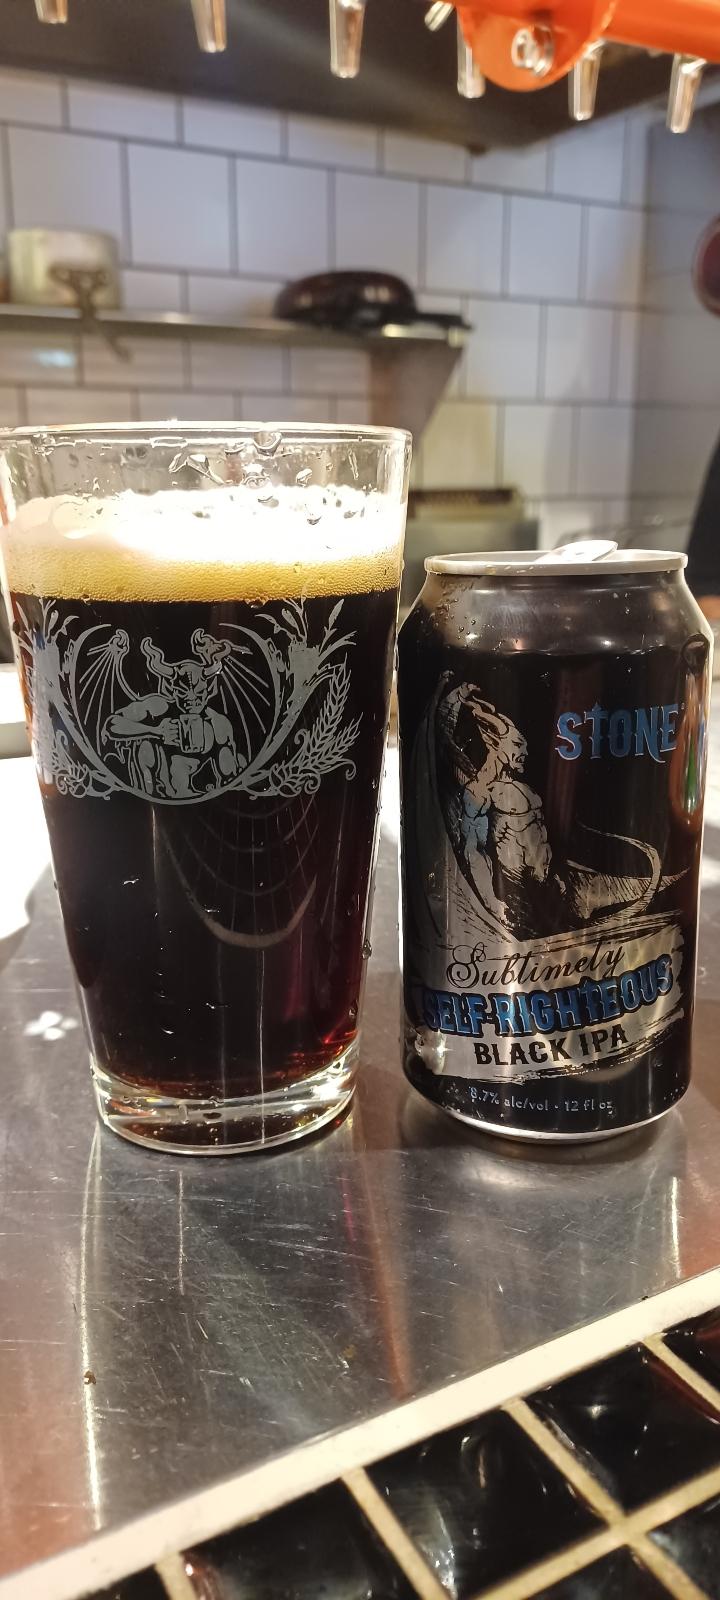 Sublimely Self-Righteous Ale